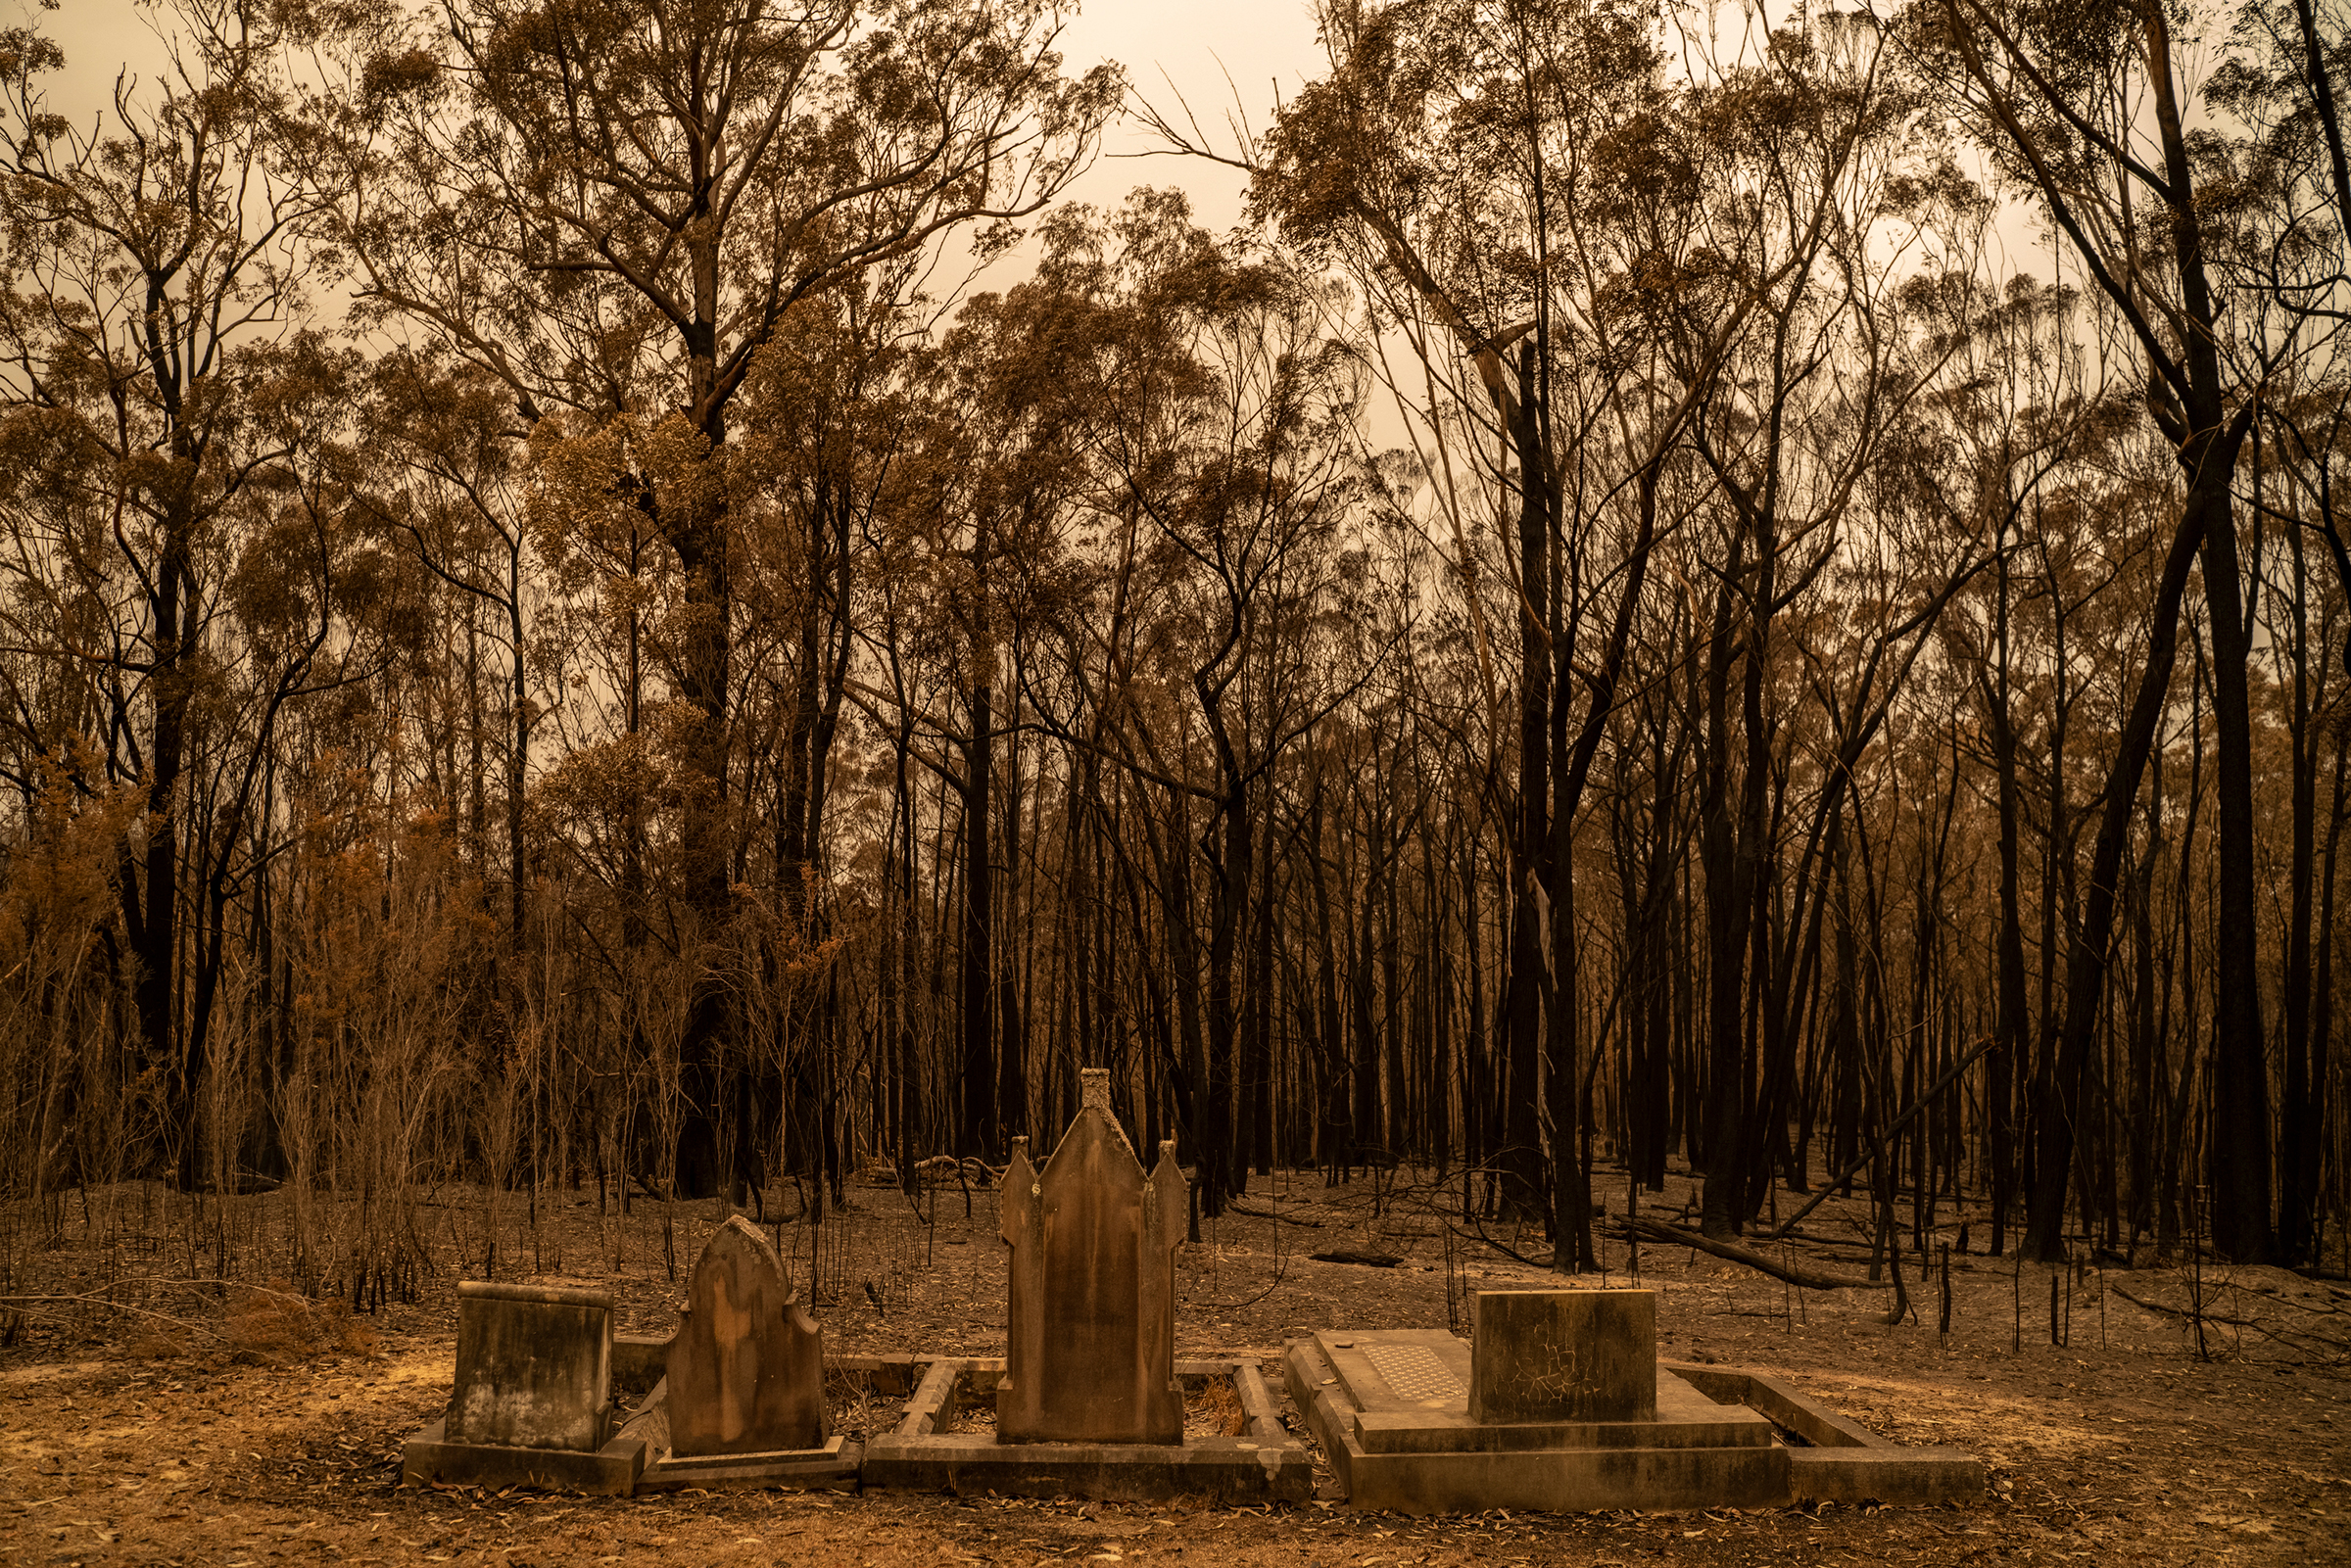 A cemetery recently hit by bushfires near Mogo, New South Wales, on Jan. 5.